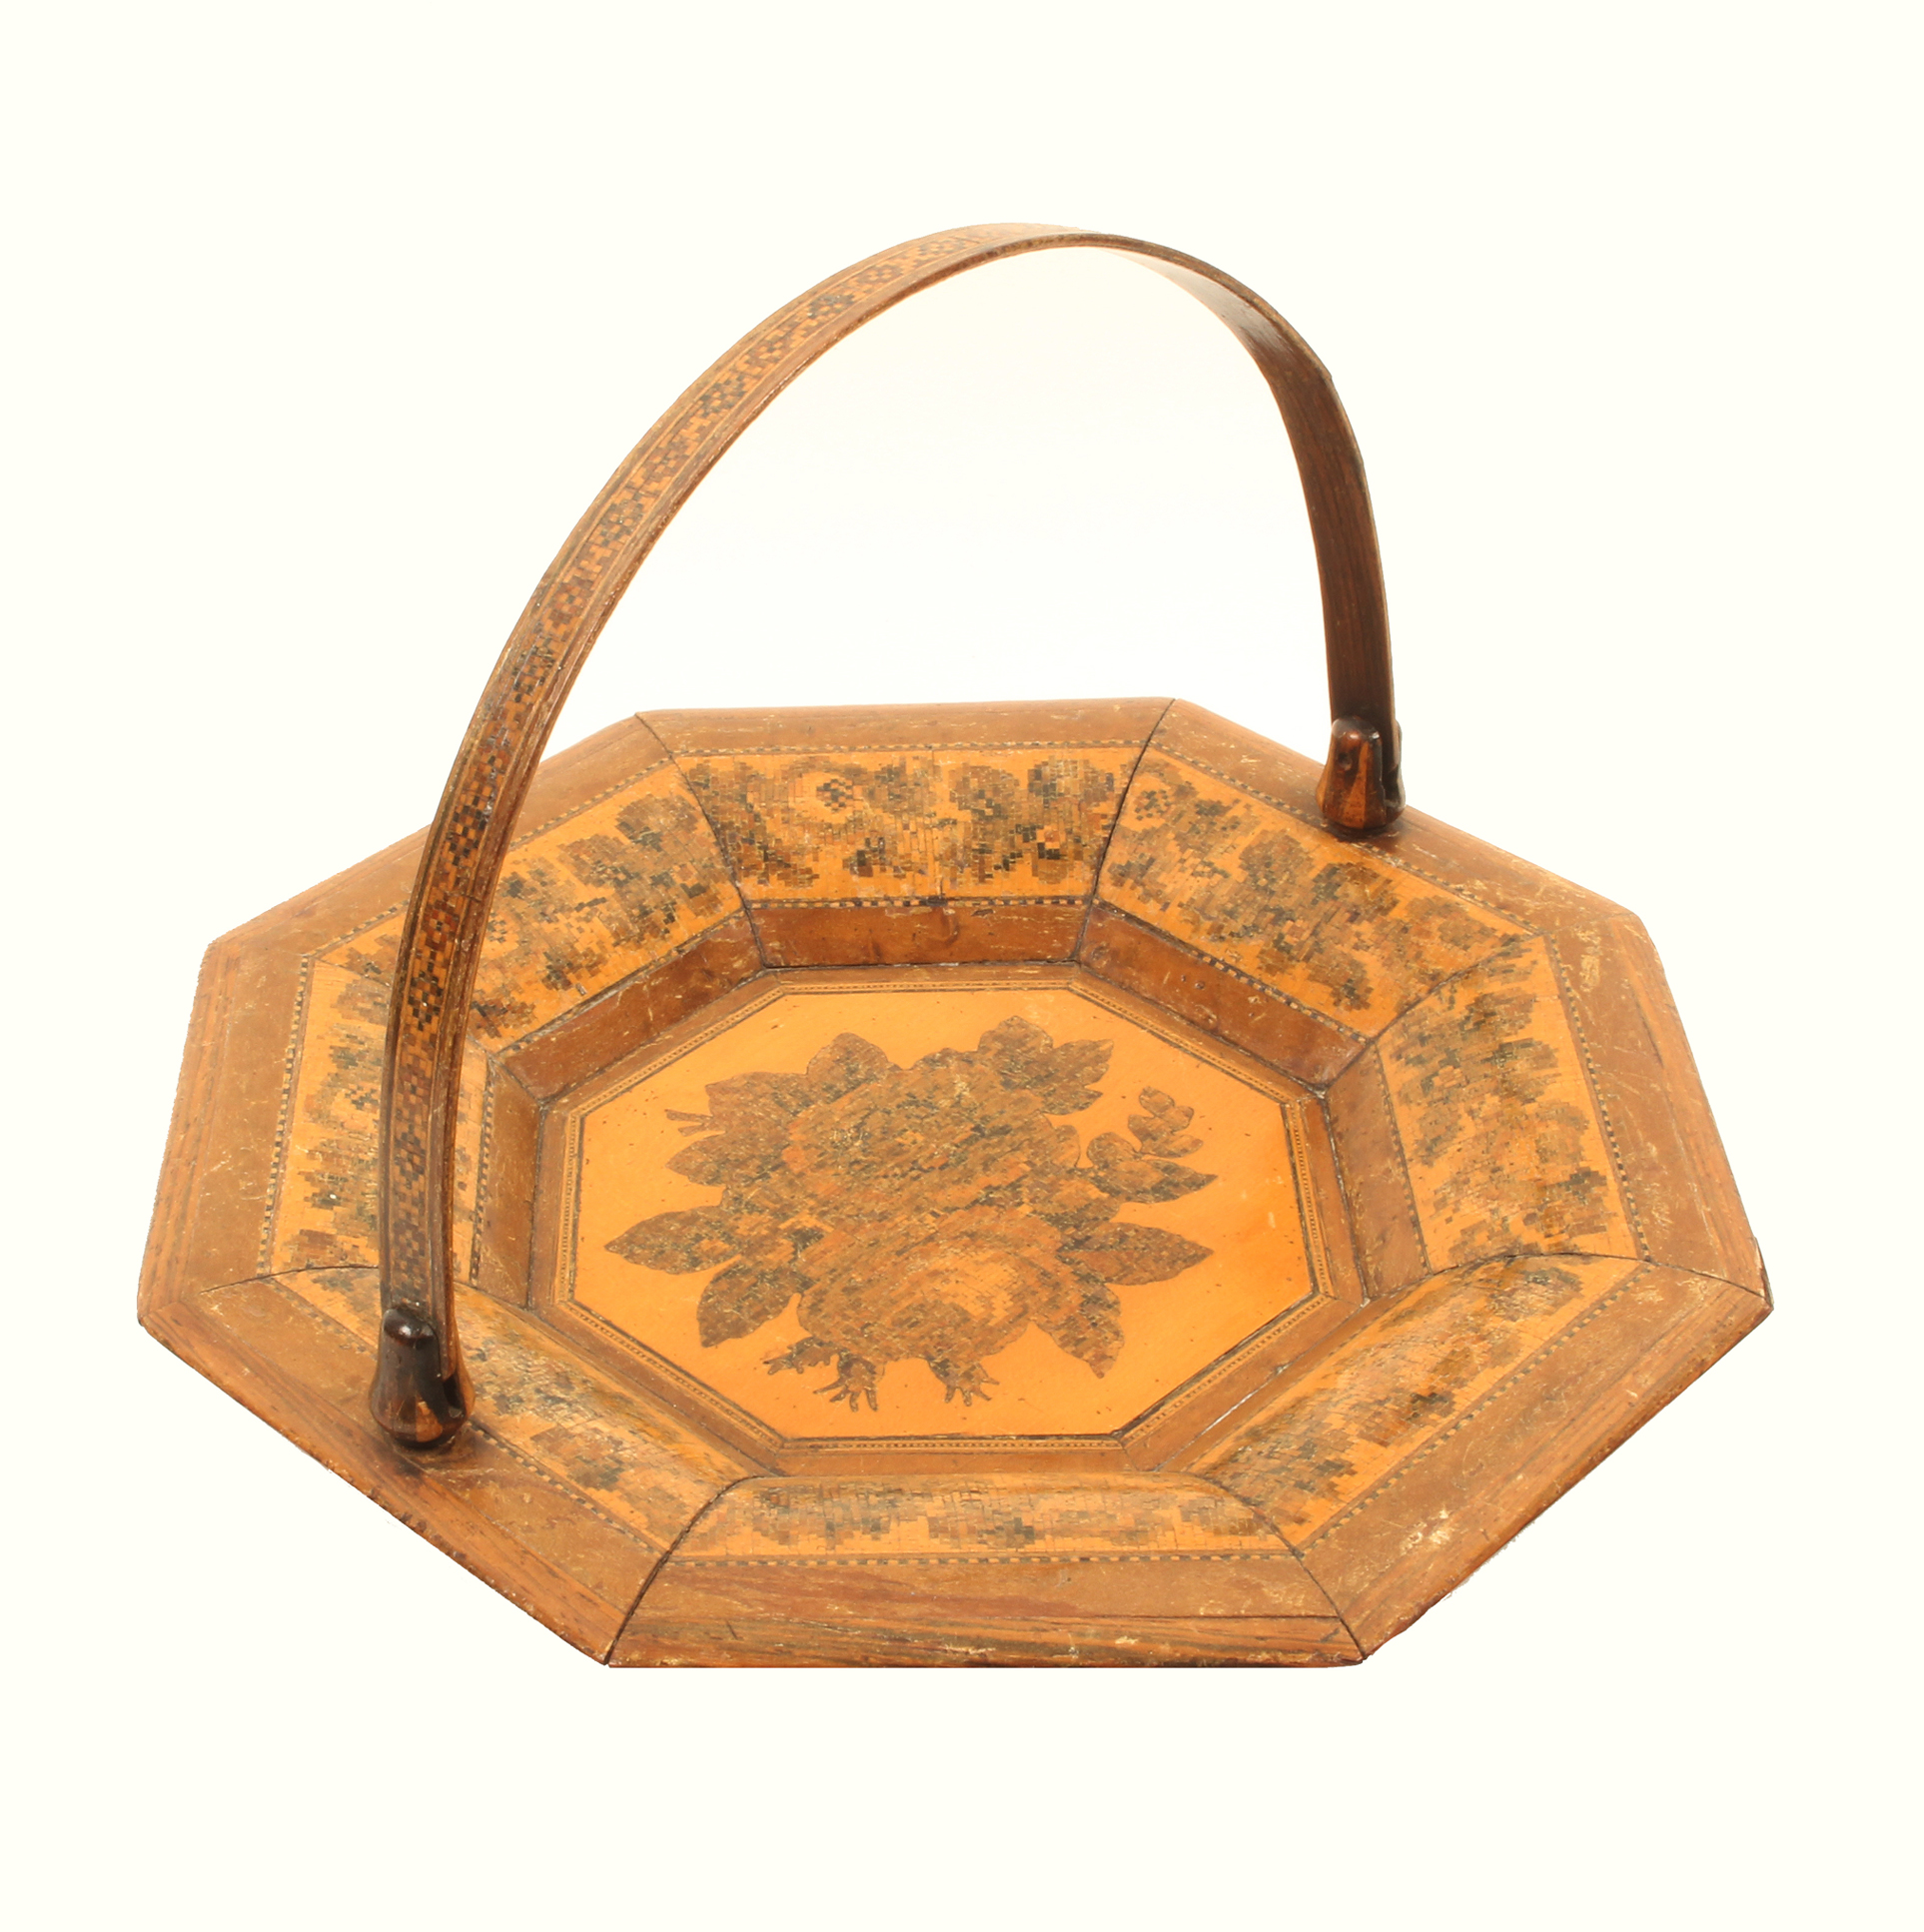 A Tunbridge ware rosewood basket of octagonal form, the centre with floral mosaic inset in